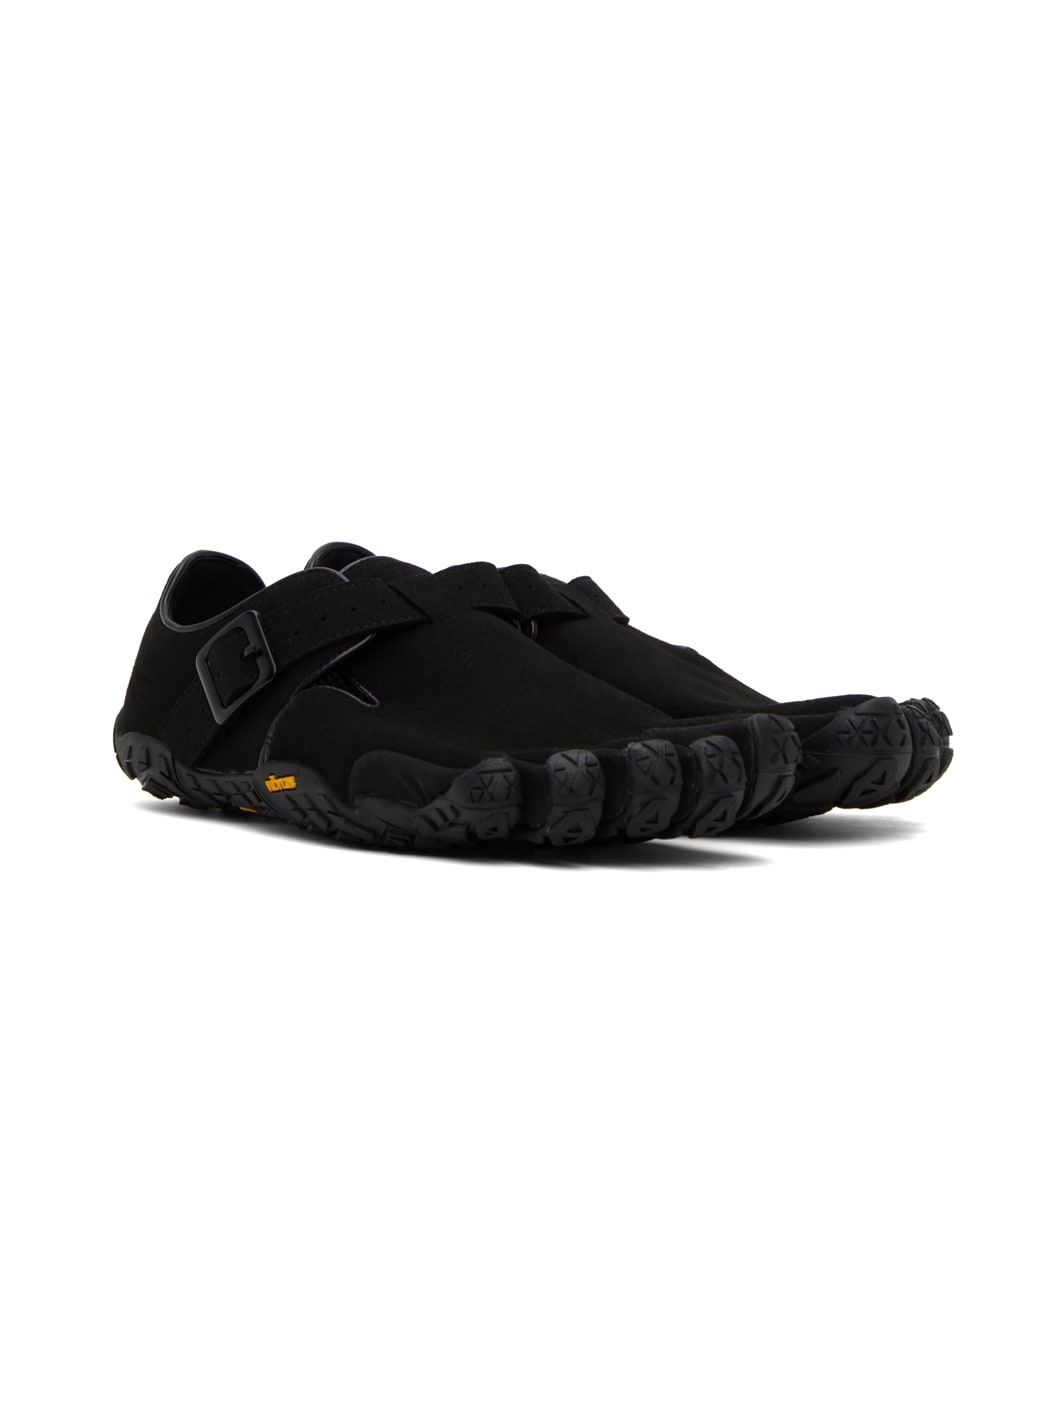 Black Suicoke Edition VFF One Strap Sneakers - 4